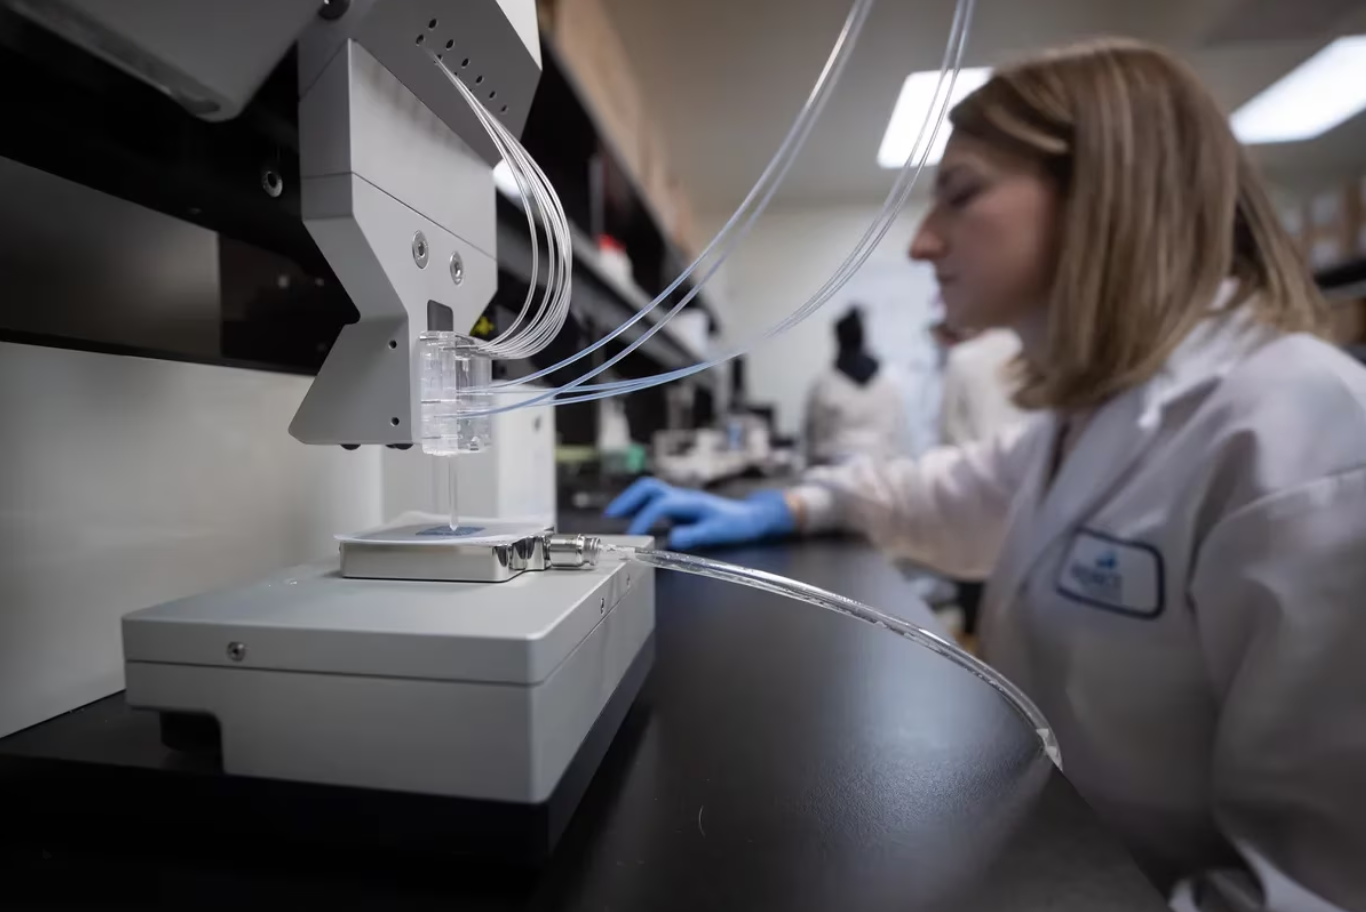 Image: “Erin Bedford, head of academic partnerships at Aspect Biosystems, uses a RX1 bioprinter to make a 3D tissue patch. Aspect’s goal is to repair or supplement impaired biological functions like insulin production in diabetes patients.” DARRYL DYCK/THE GLOBE AND MAIL